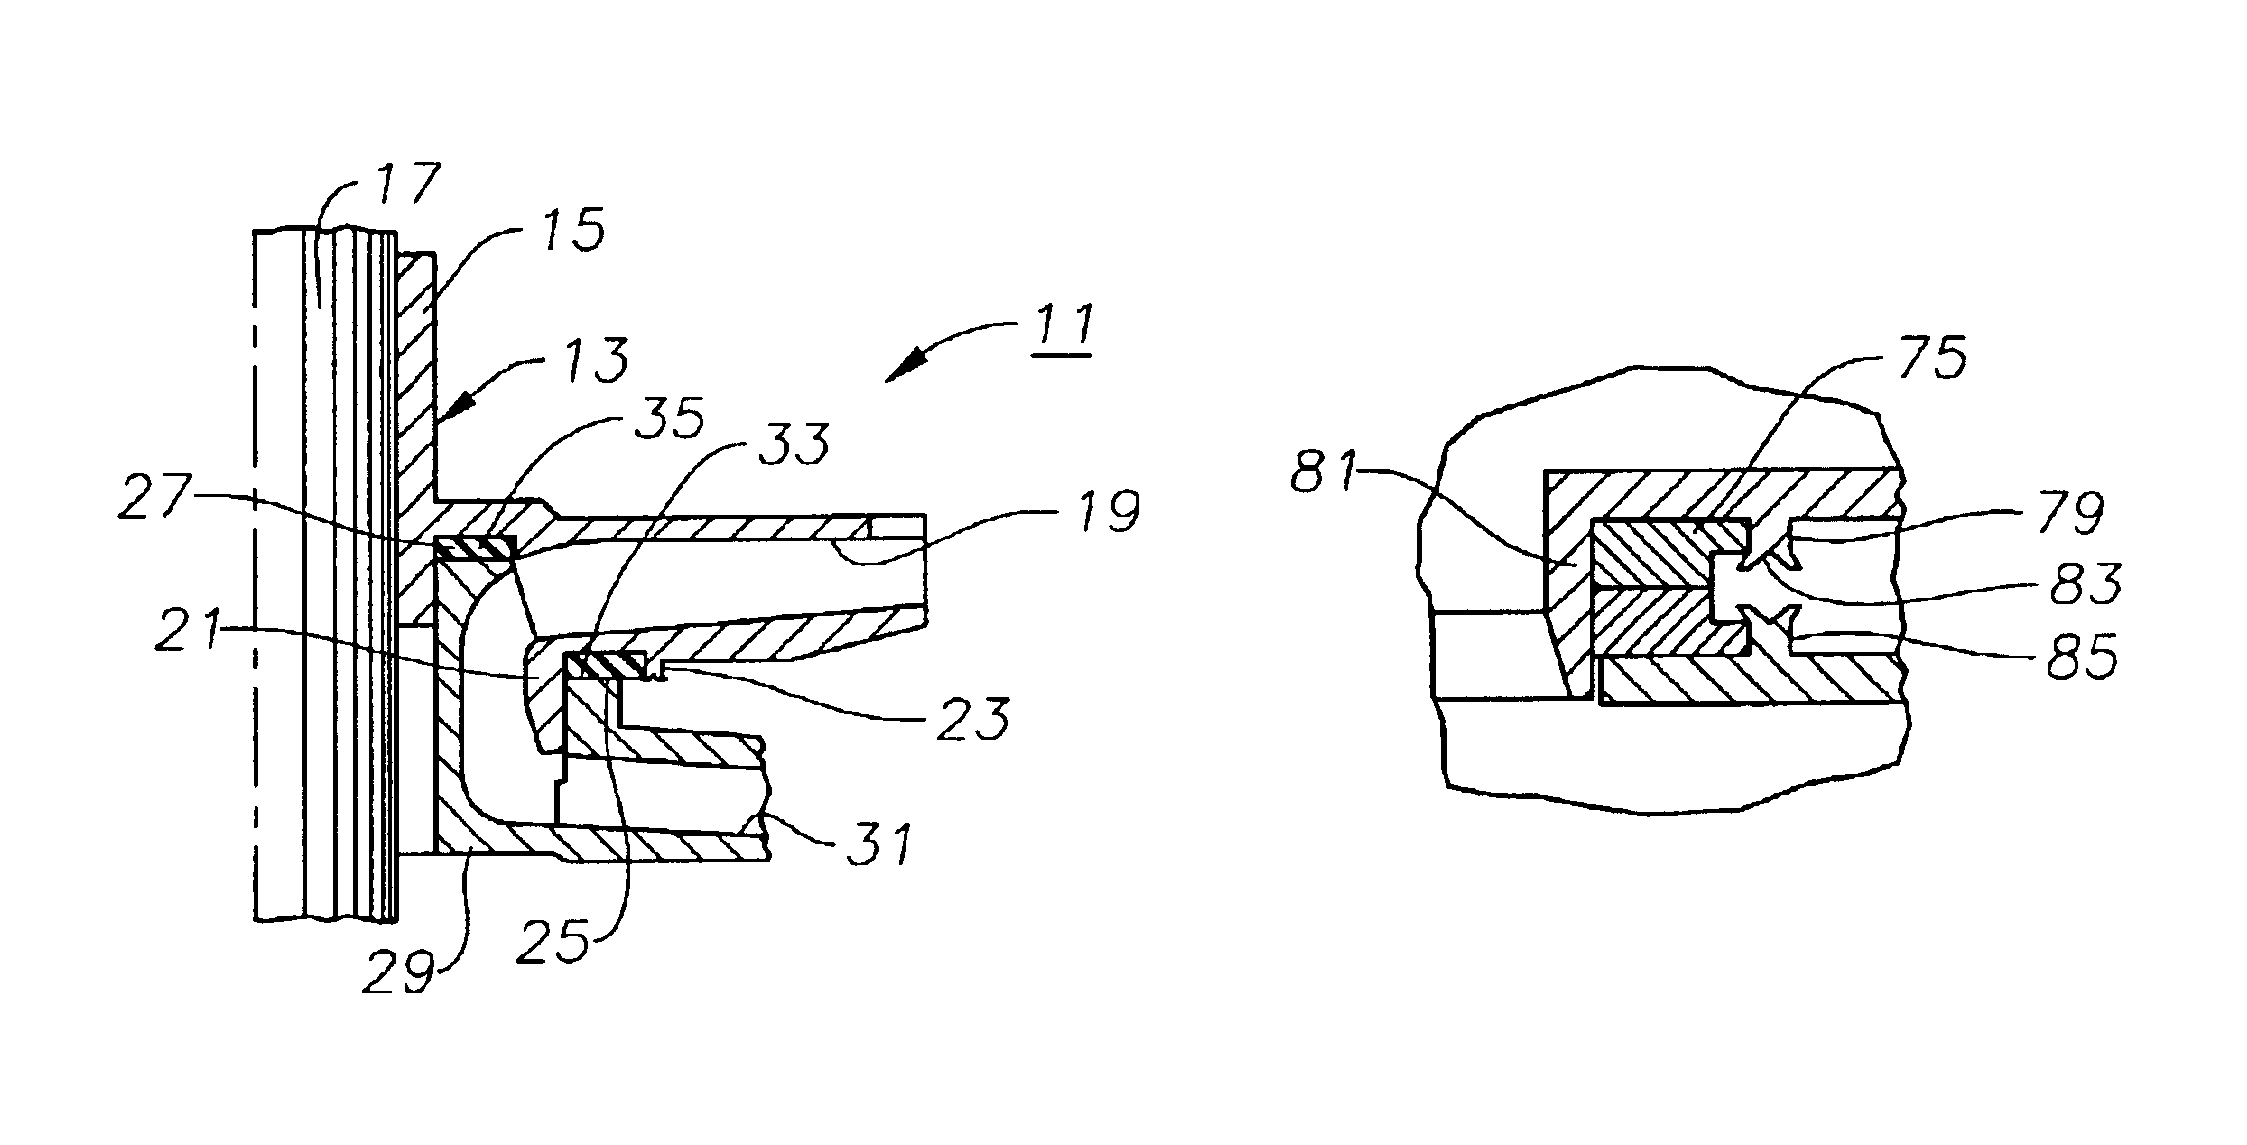 Attachment of bearing elements by deformation